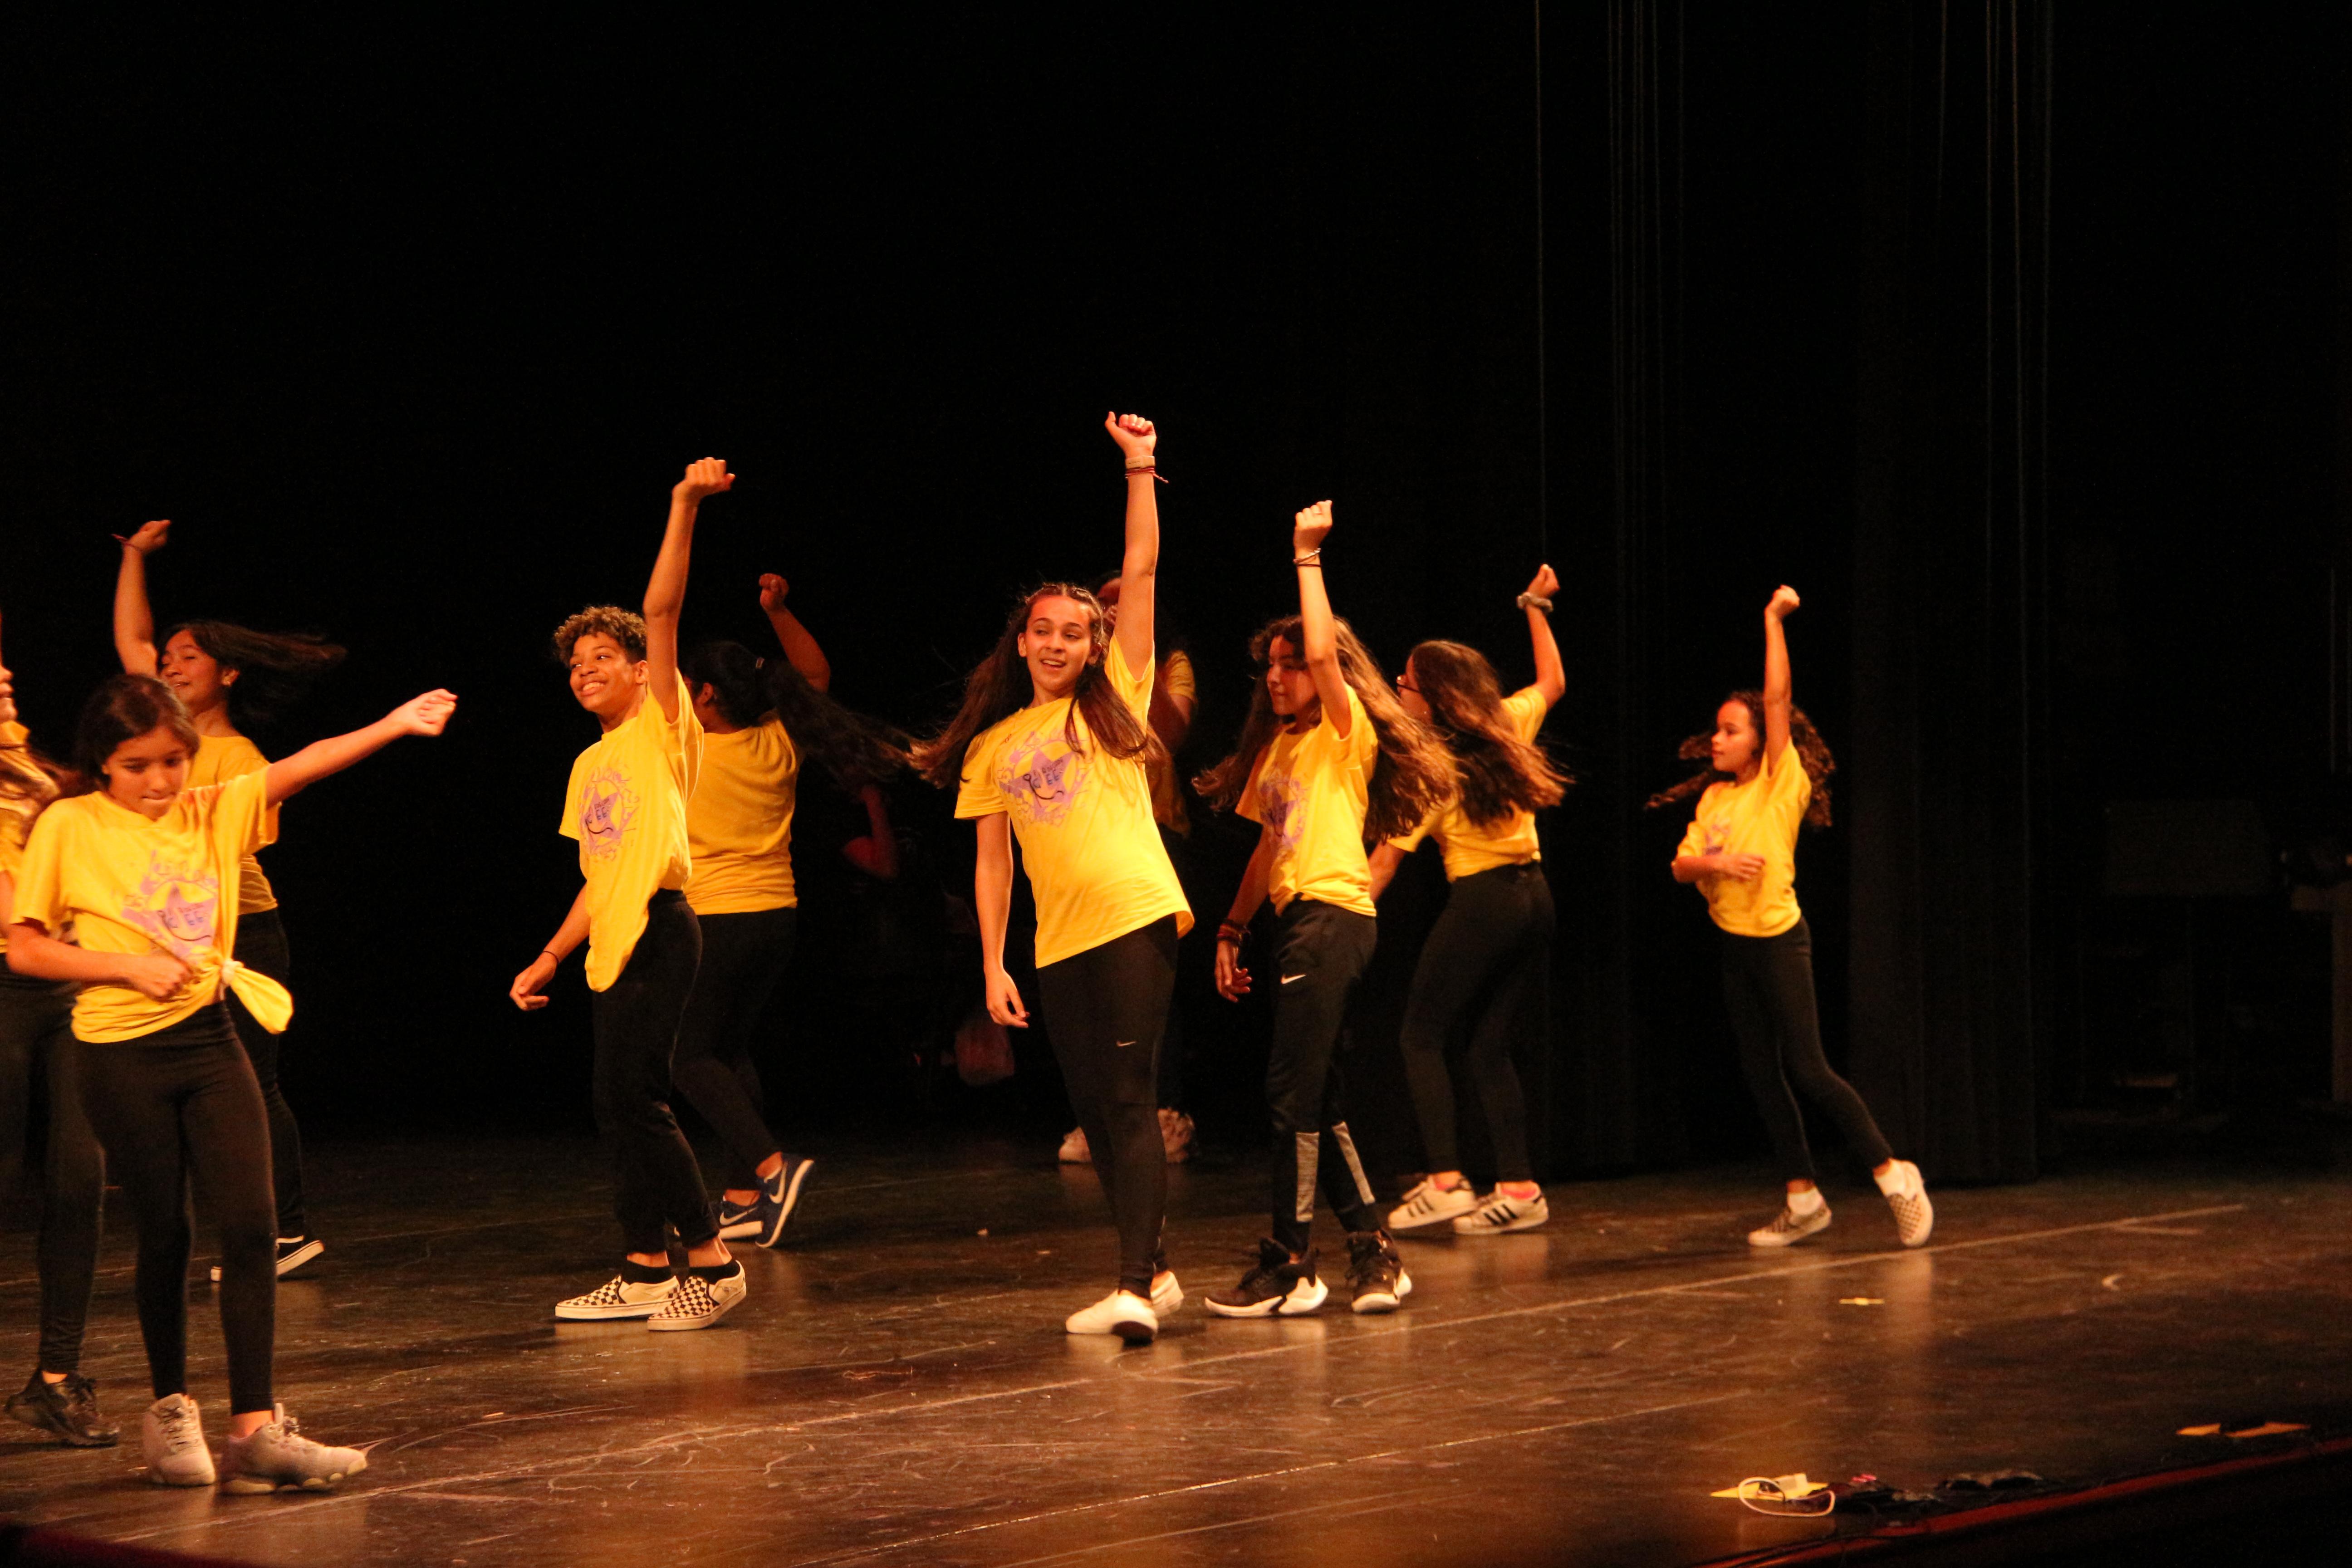 middle school girls wearing yellow t-shirts dancing together